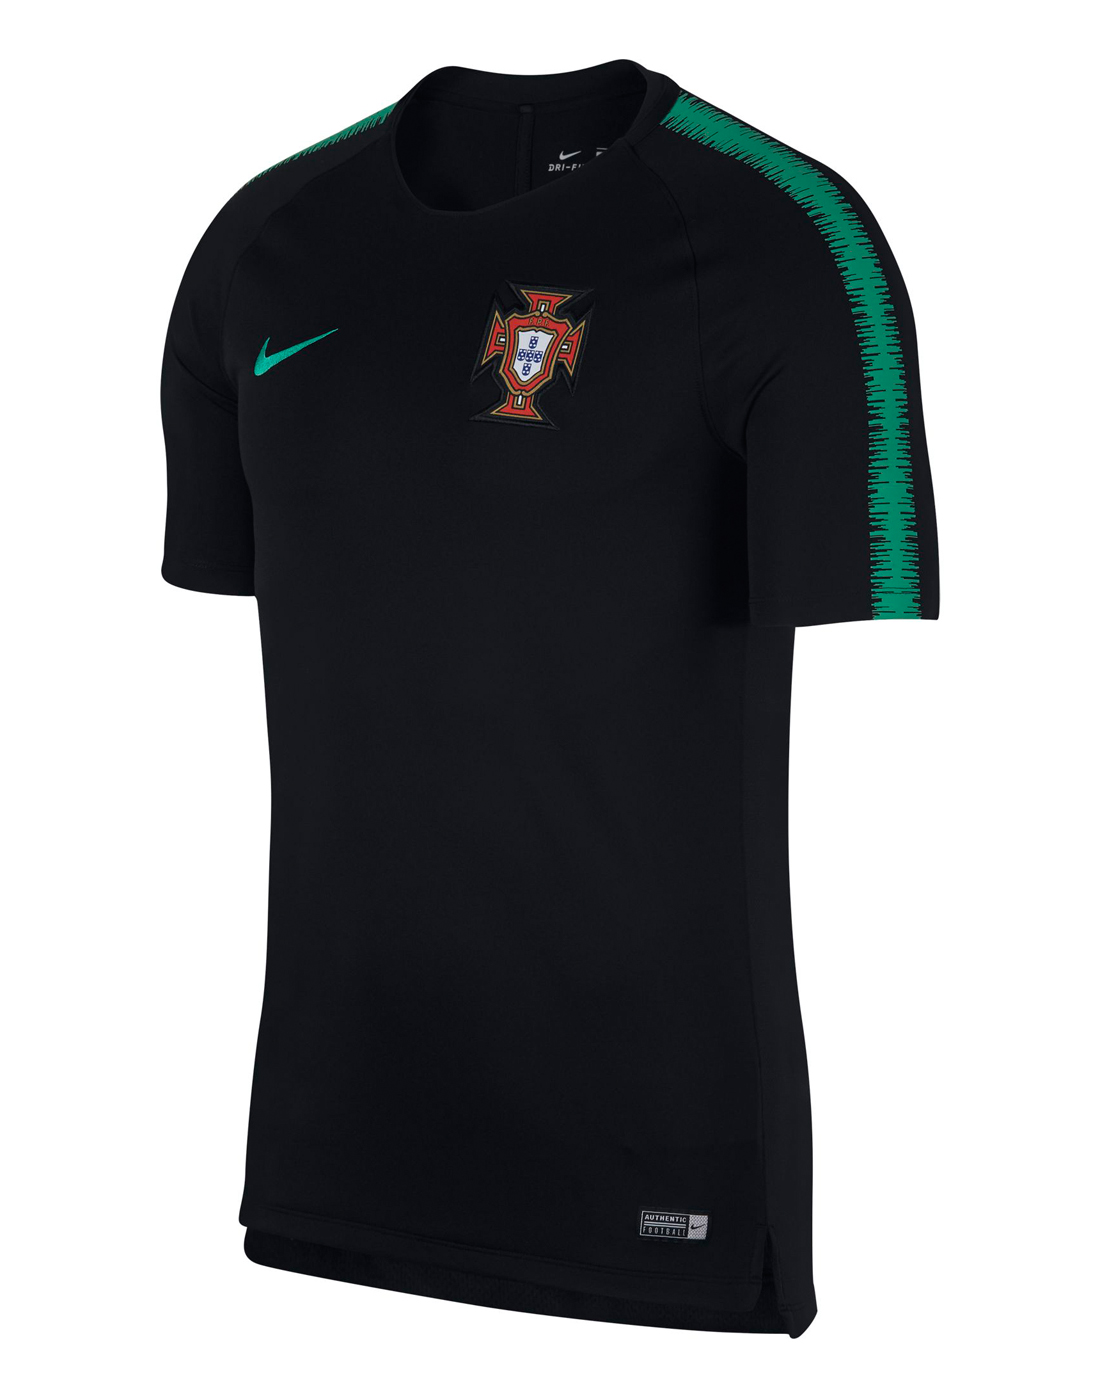 portugal training jersey